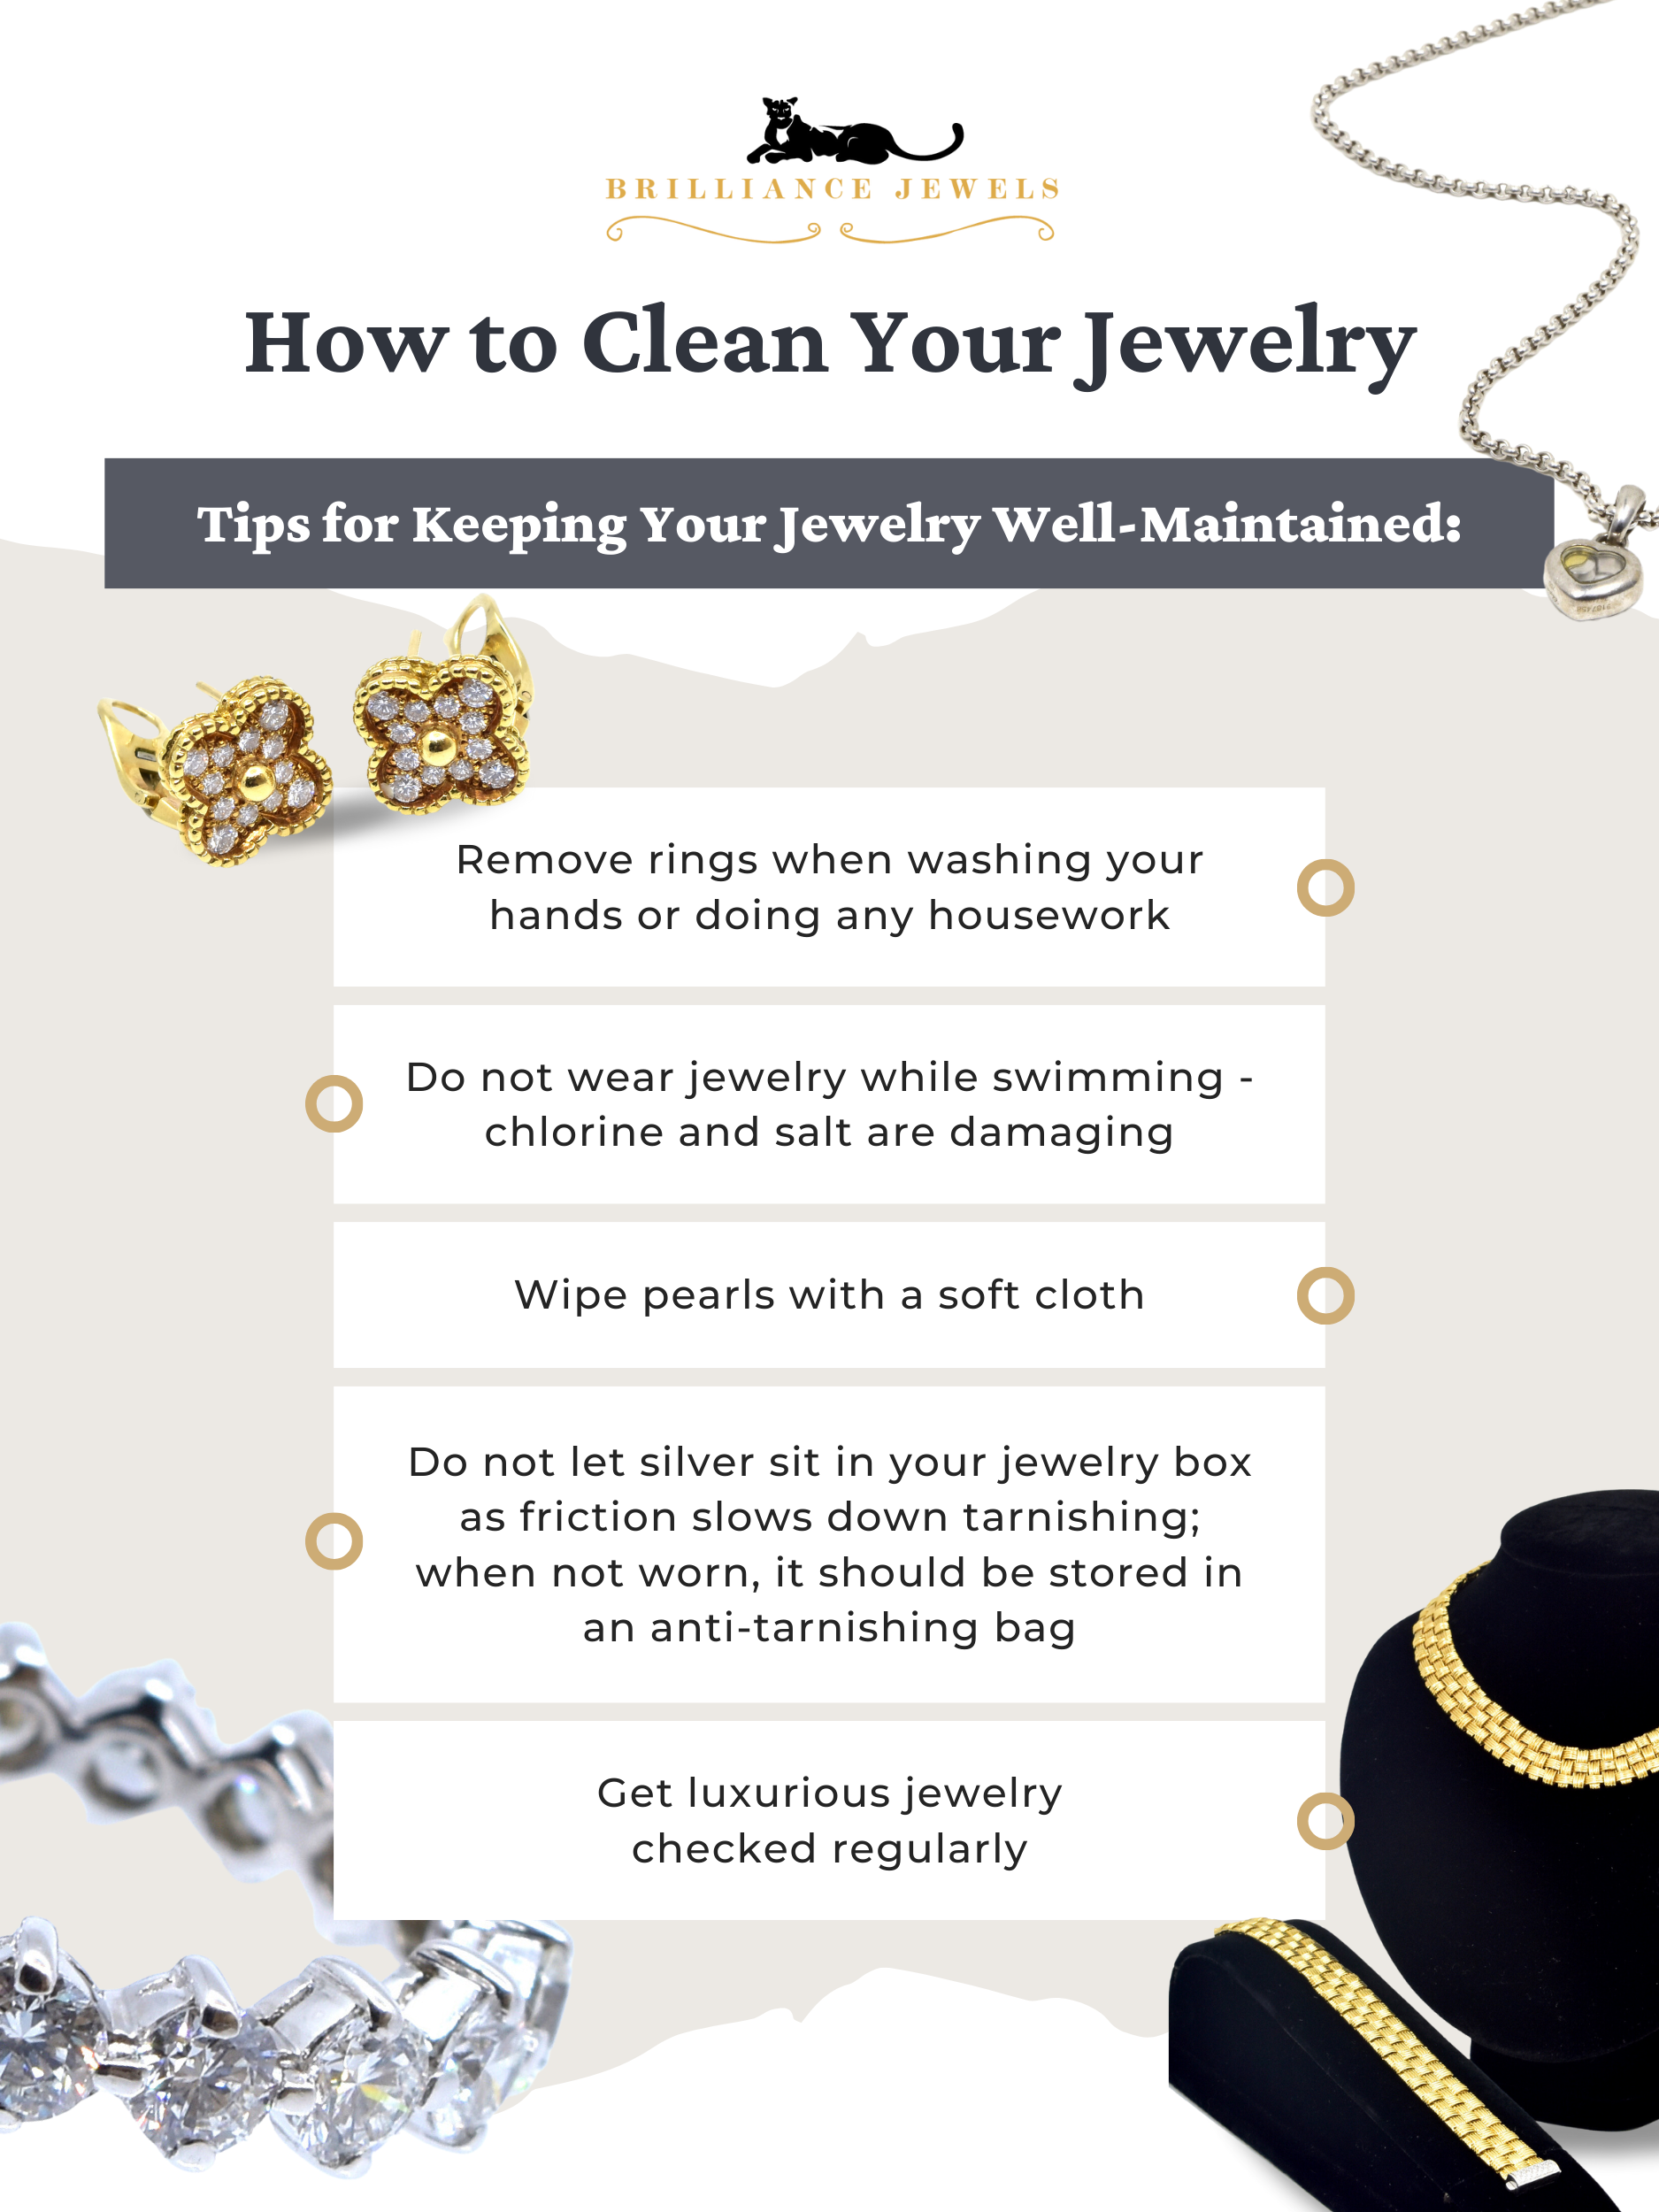 How To Clean Your Jewelry - Tips for Keeping Your Jewelry Well-Maintained